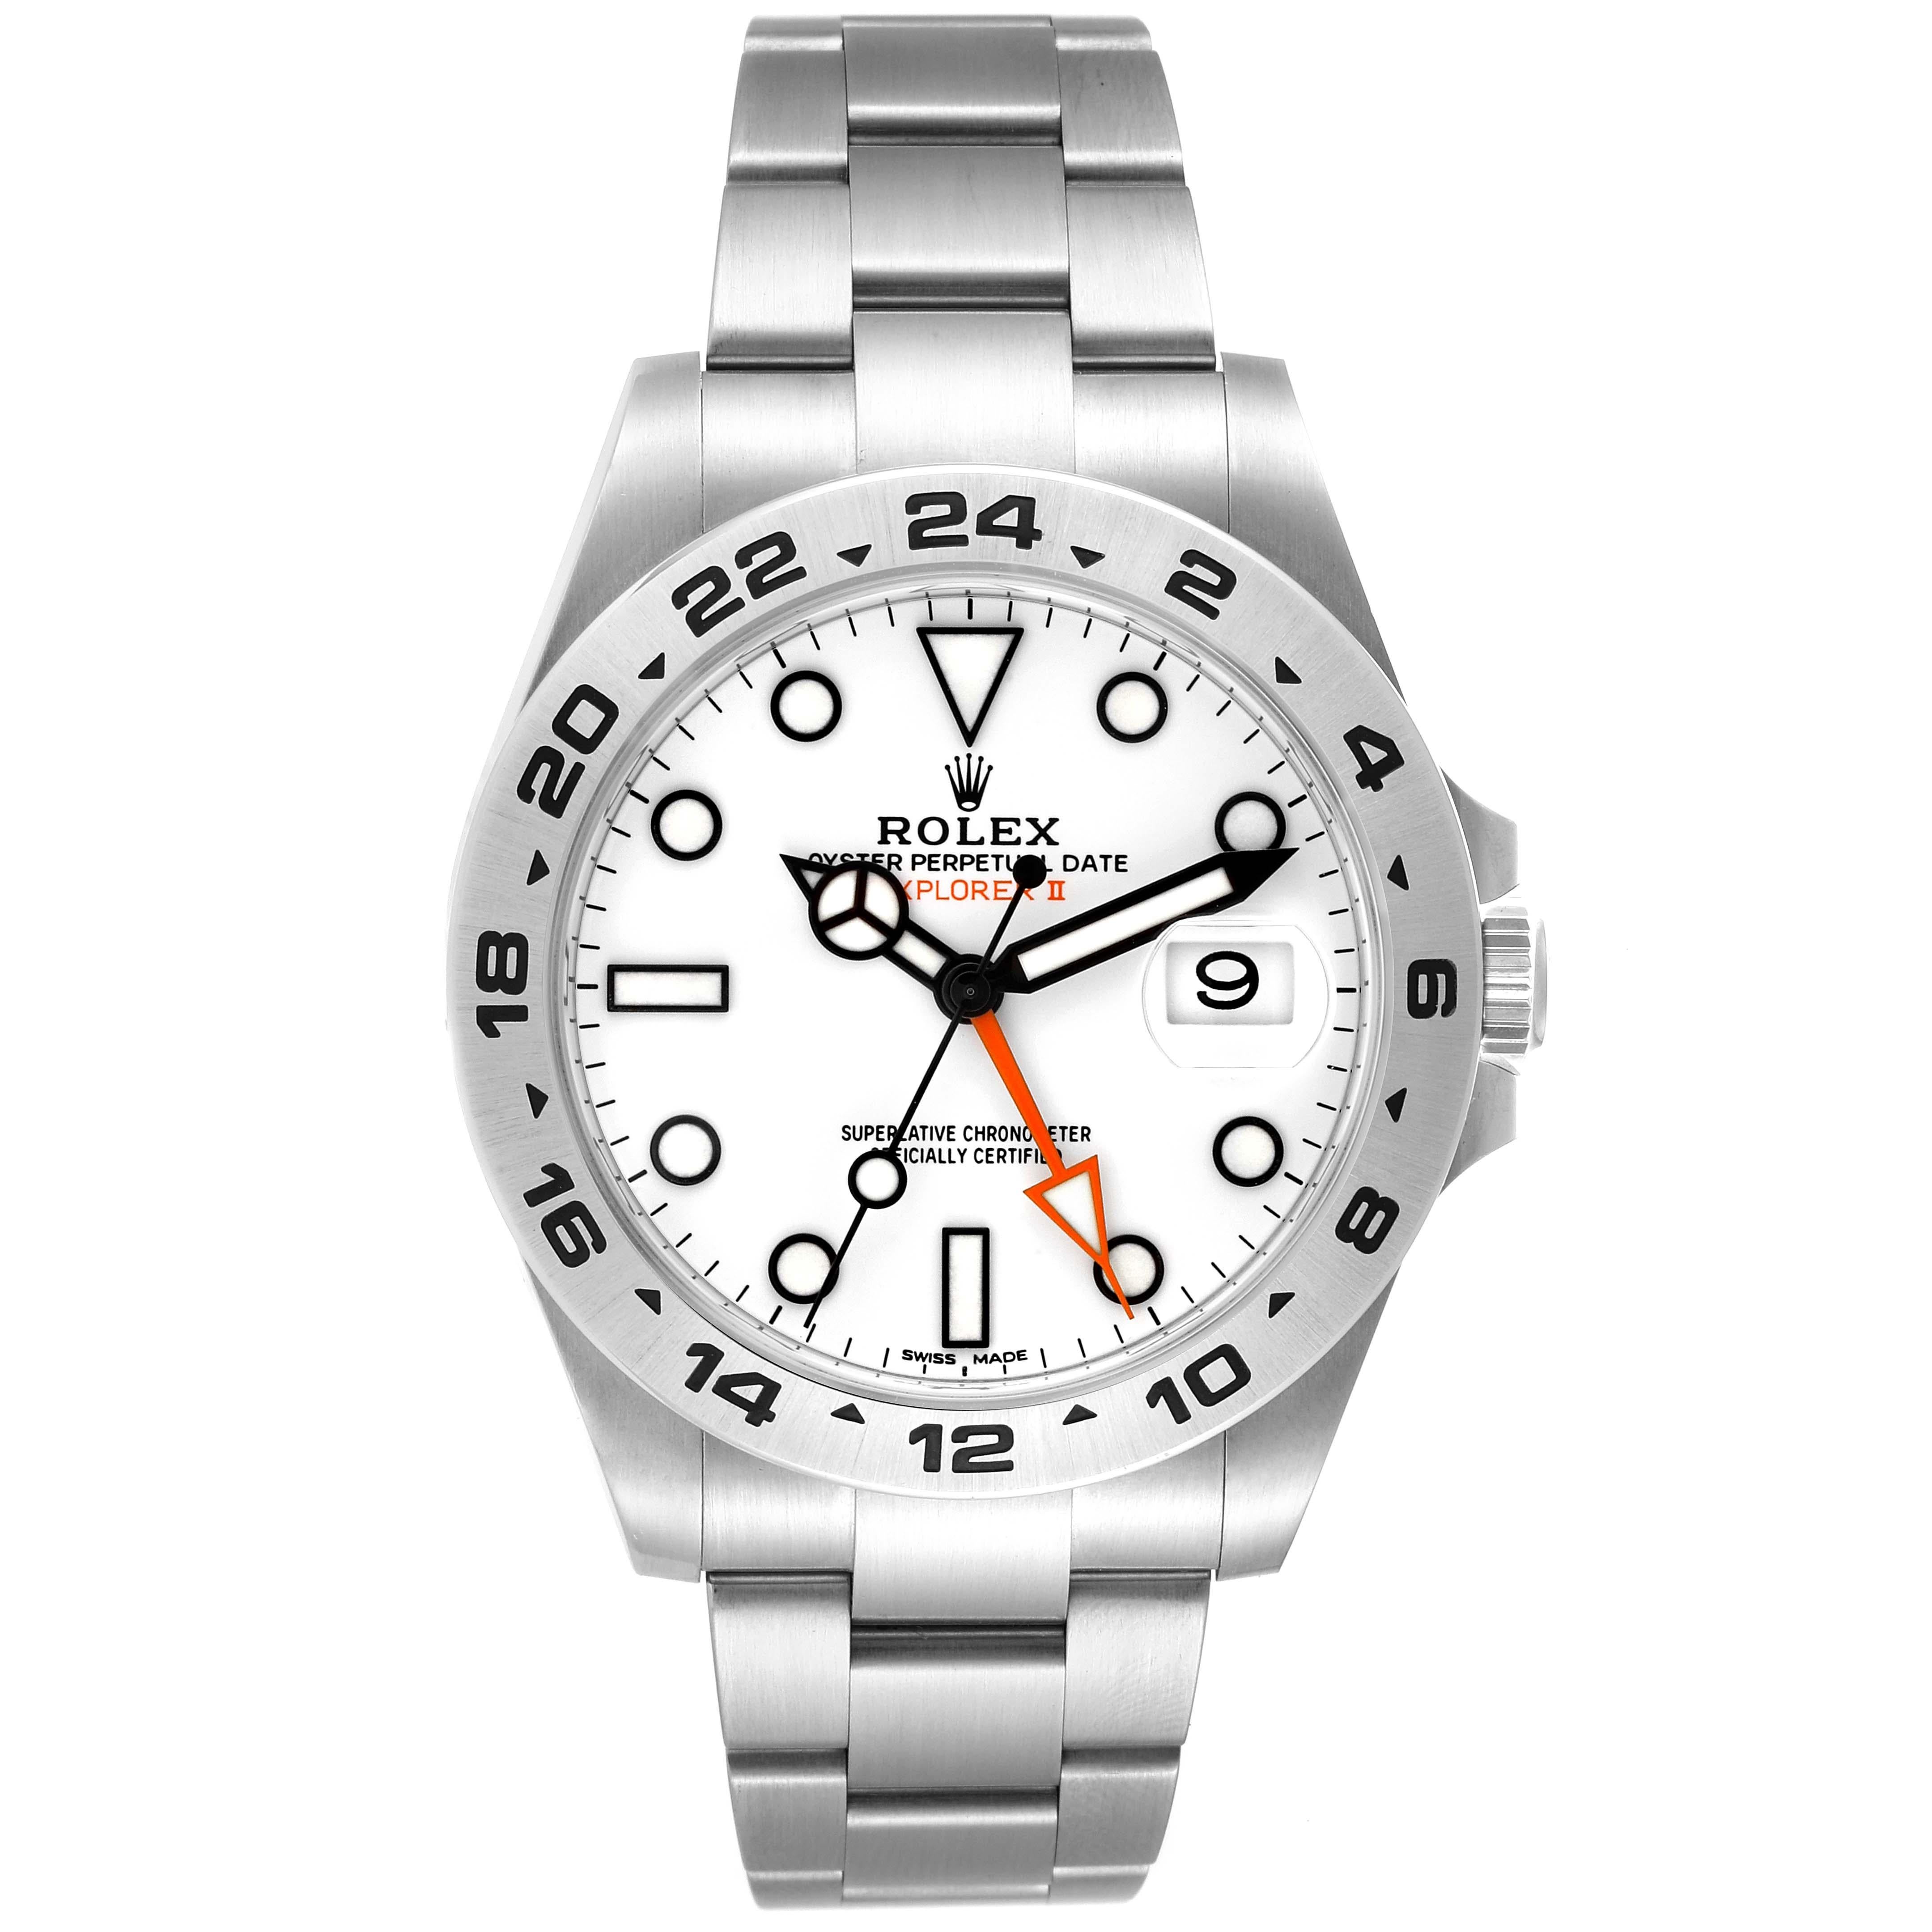 Rolex Explorer II 42 White Dial Orange Hand Steel Mens Watch 216570 Box Card. Officially certified chronometer automatic self-winding movement. Stainless steel case 42.0 mm in diameter. Rolex logo on the crown. Stainless steel bezel with engraved